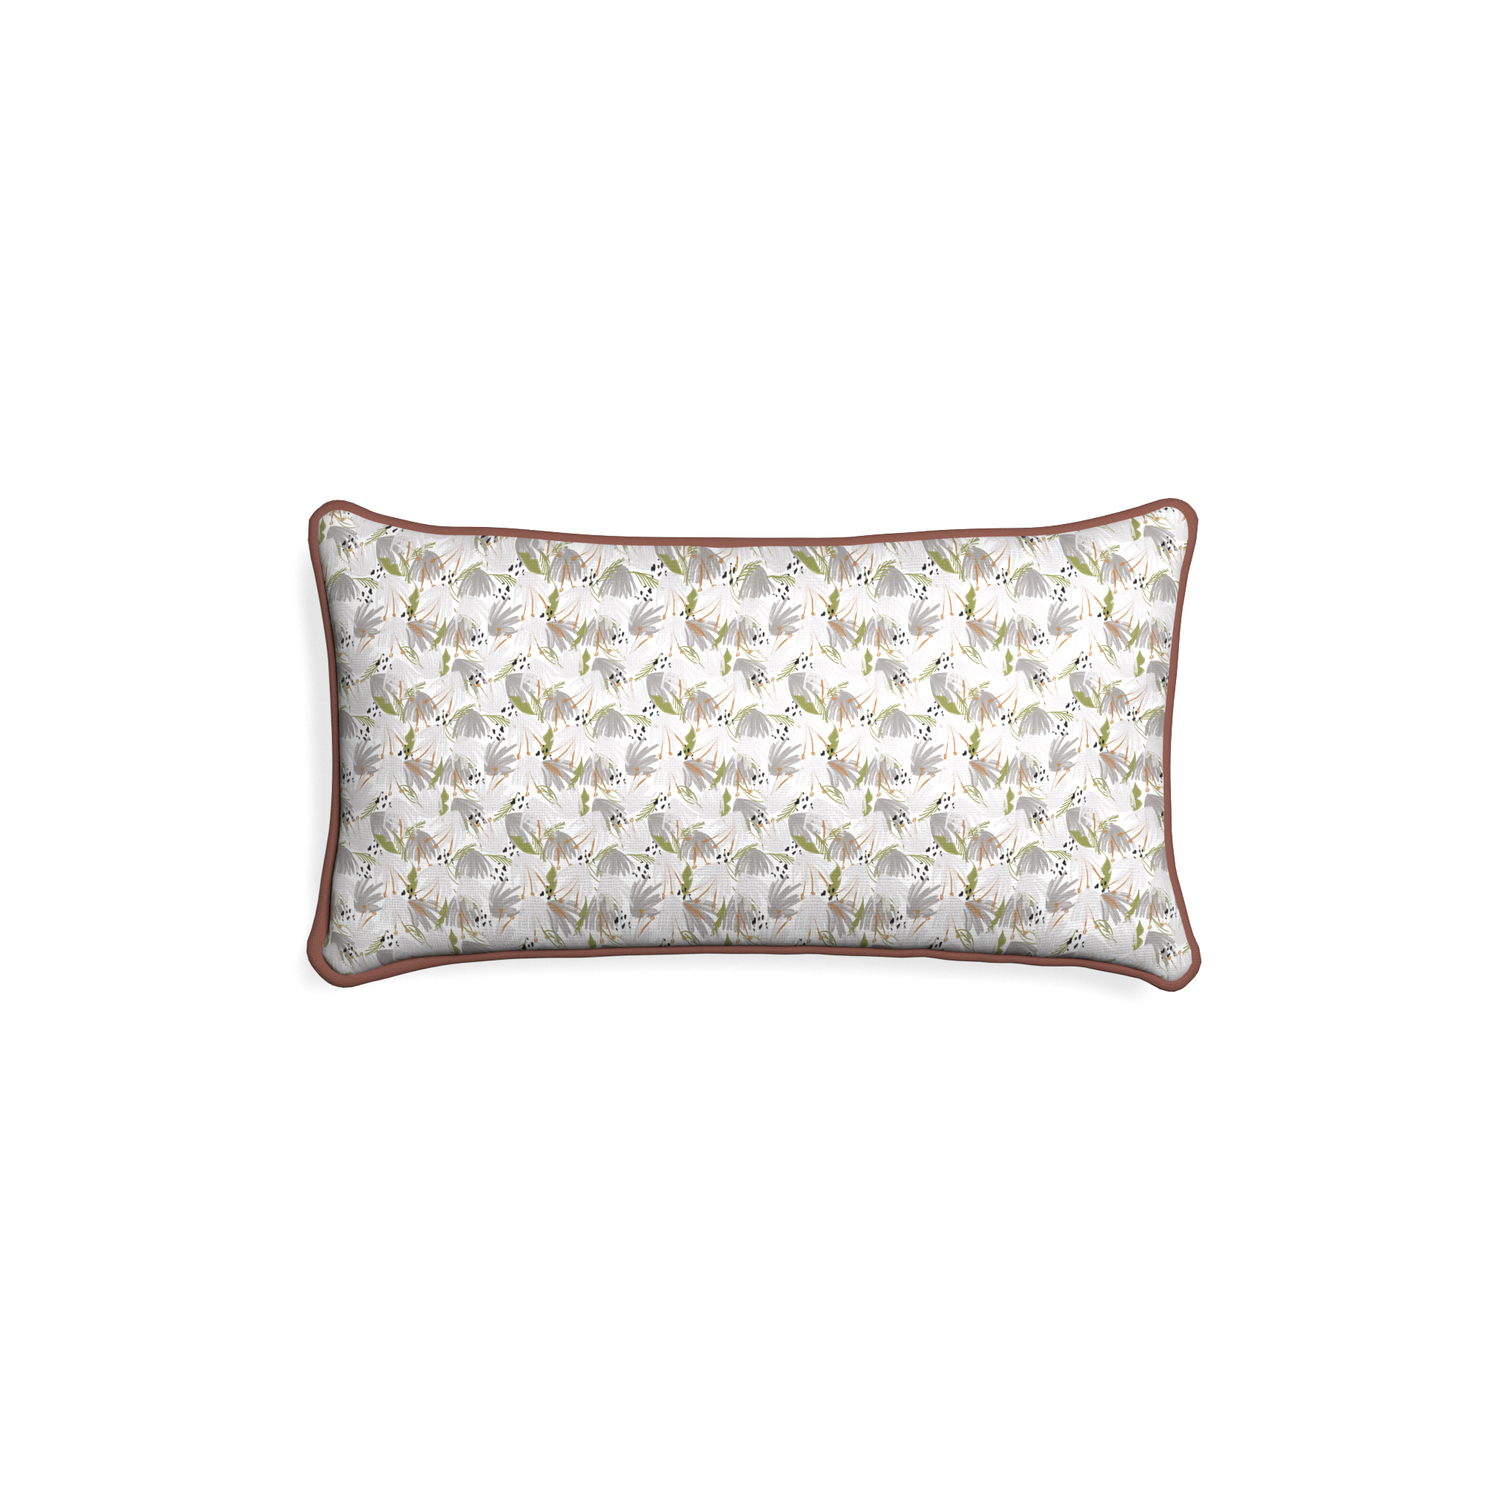 Petite-lumbar eden grey custom grey floralpillow with w piping on white background